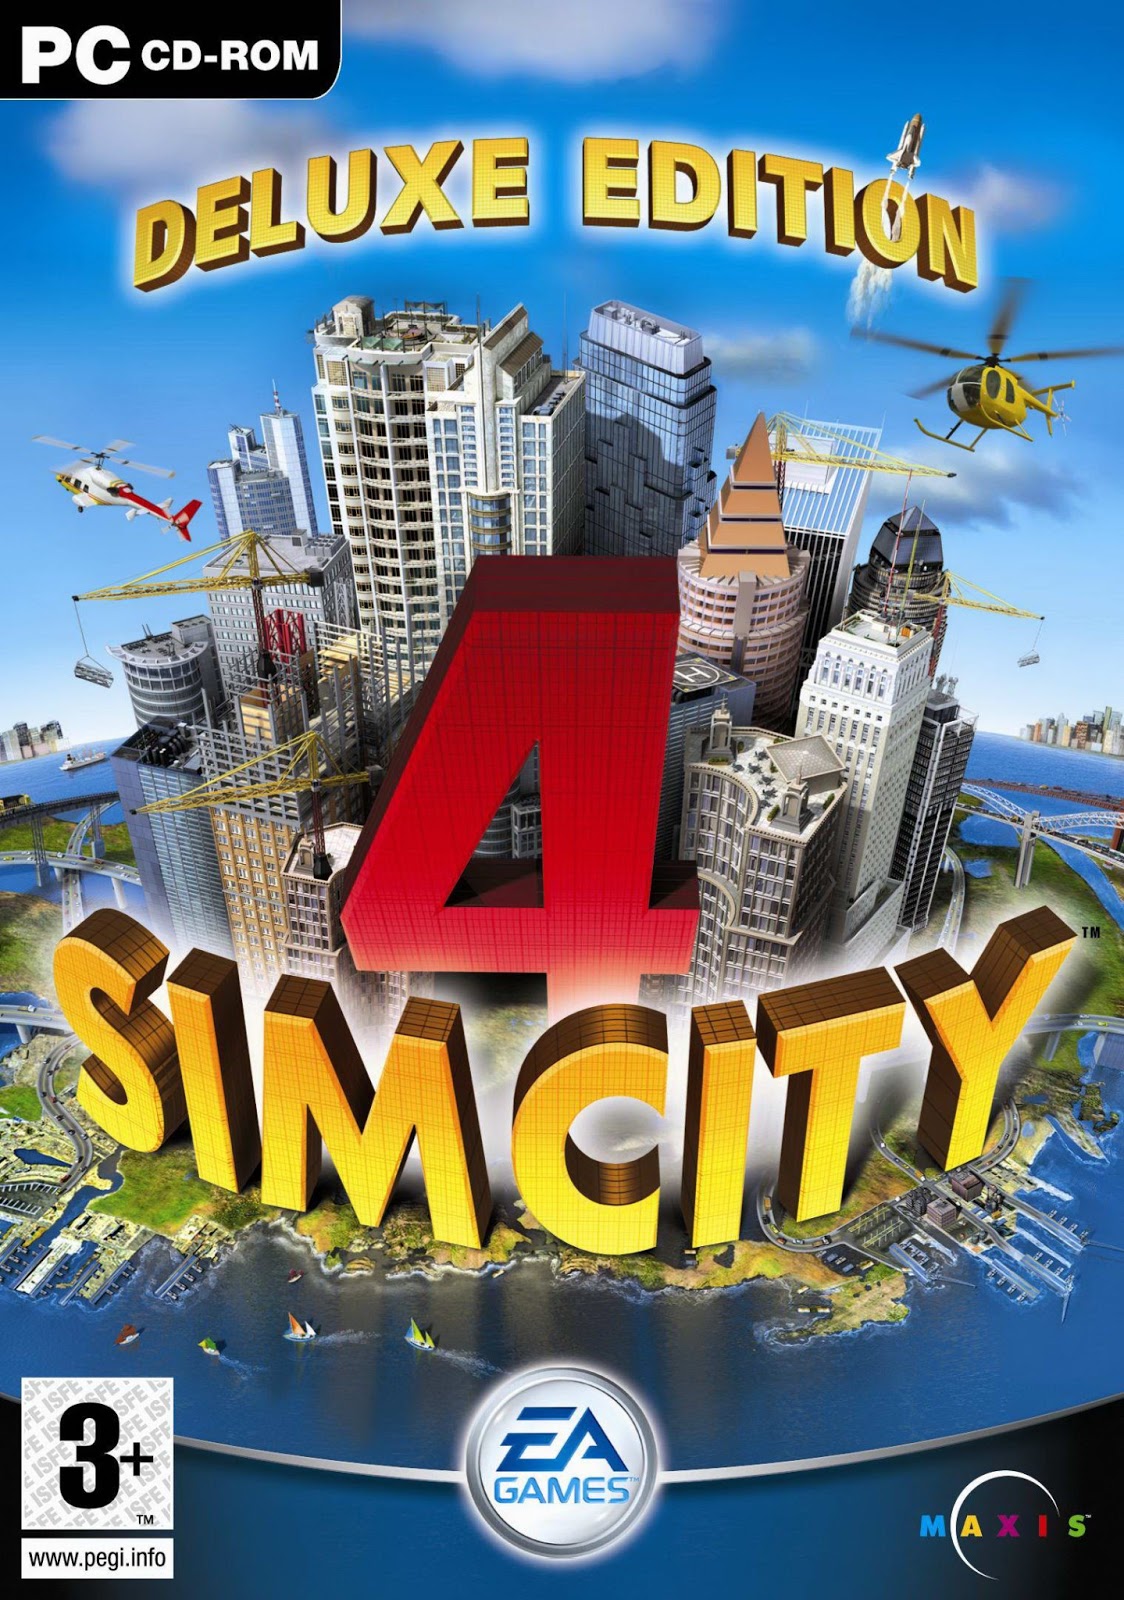 Free Download PC Game and Software Full Version: Download SimCity 4 Deluxe Edition